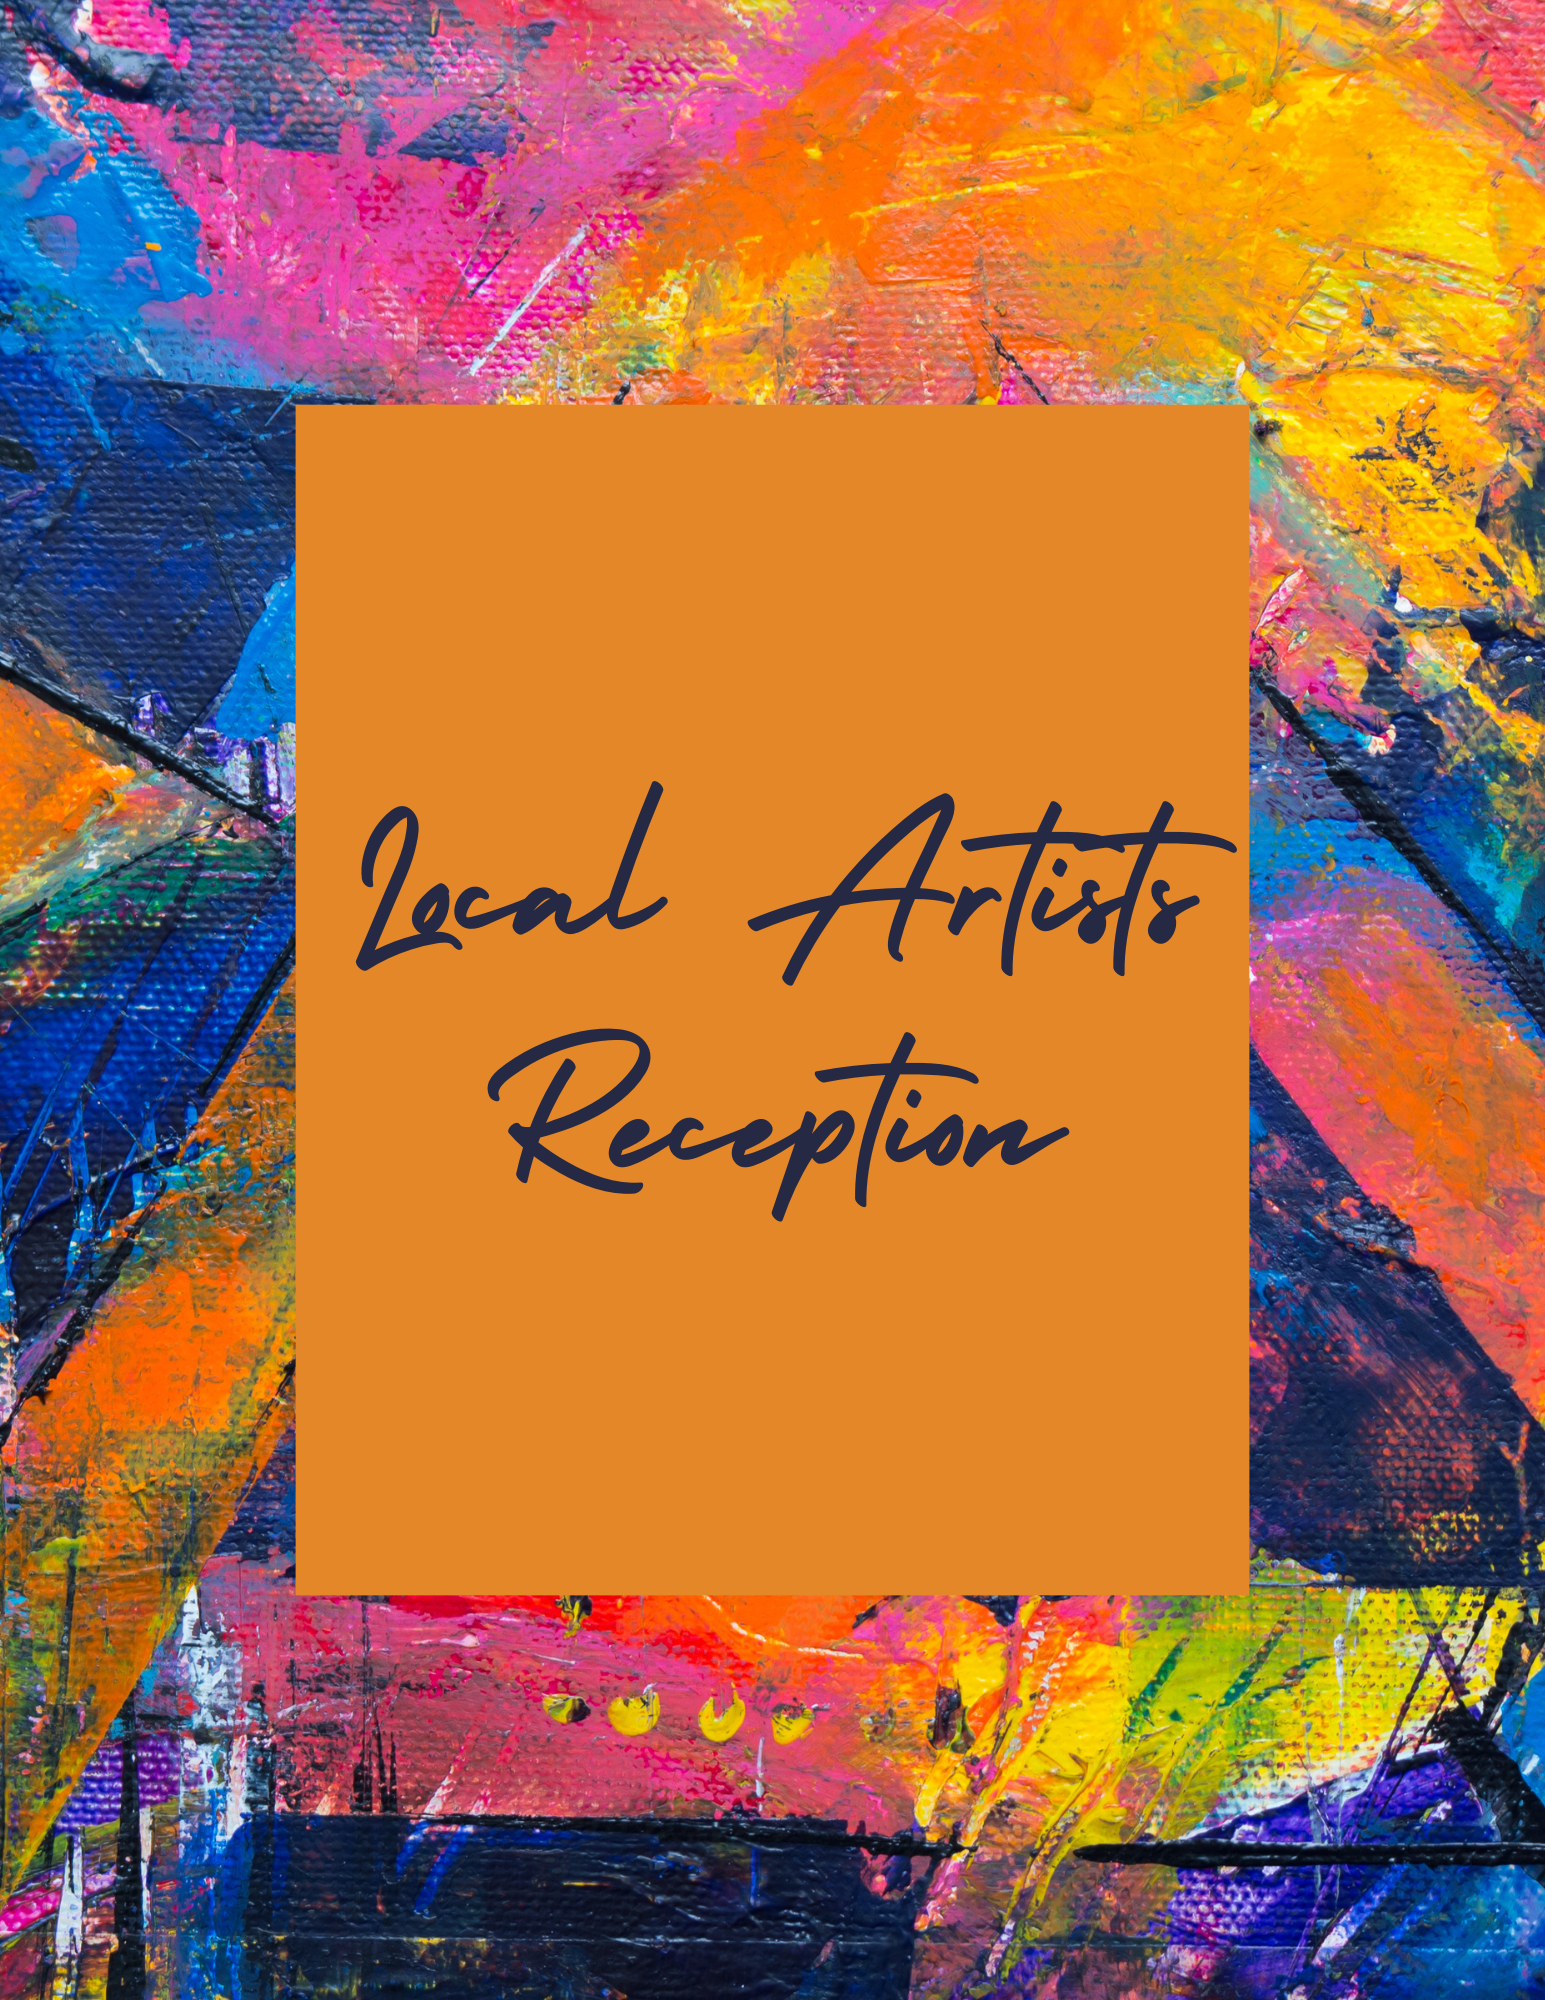 local artists reception in a splash of paint